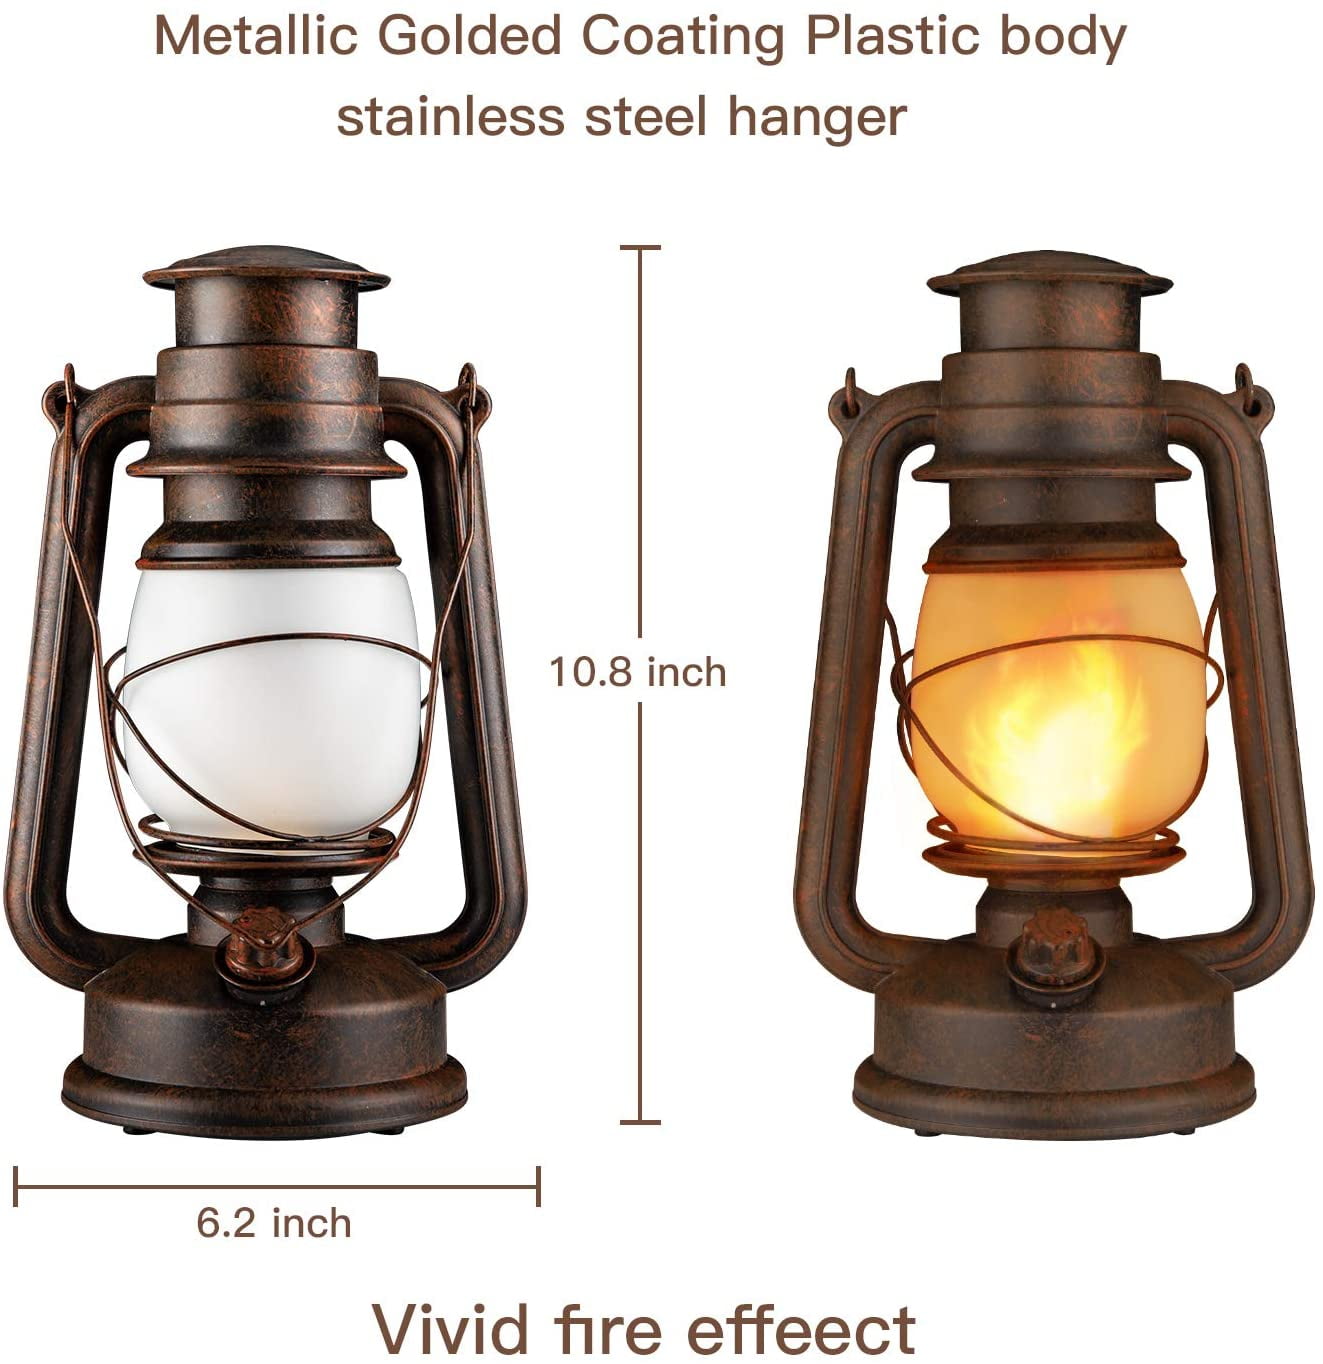 Northpoint Vintage Copper Battery Operated LED Lantern (2-Pack) 190462 (2)  - The Home Depot